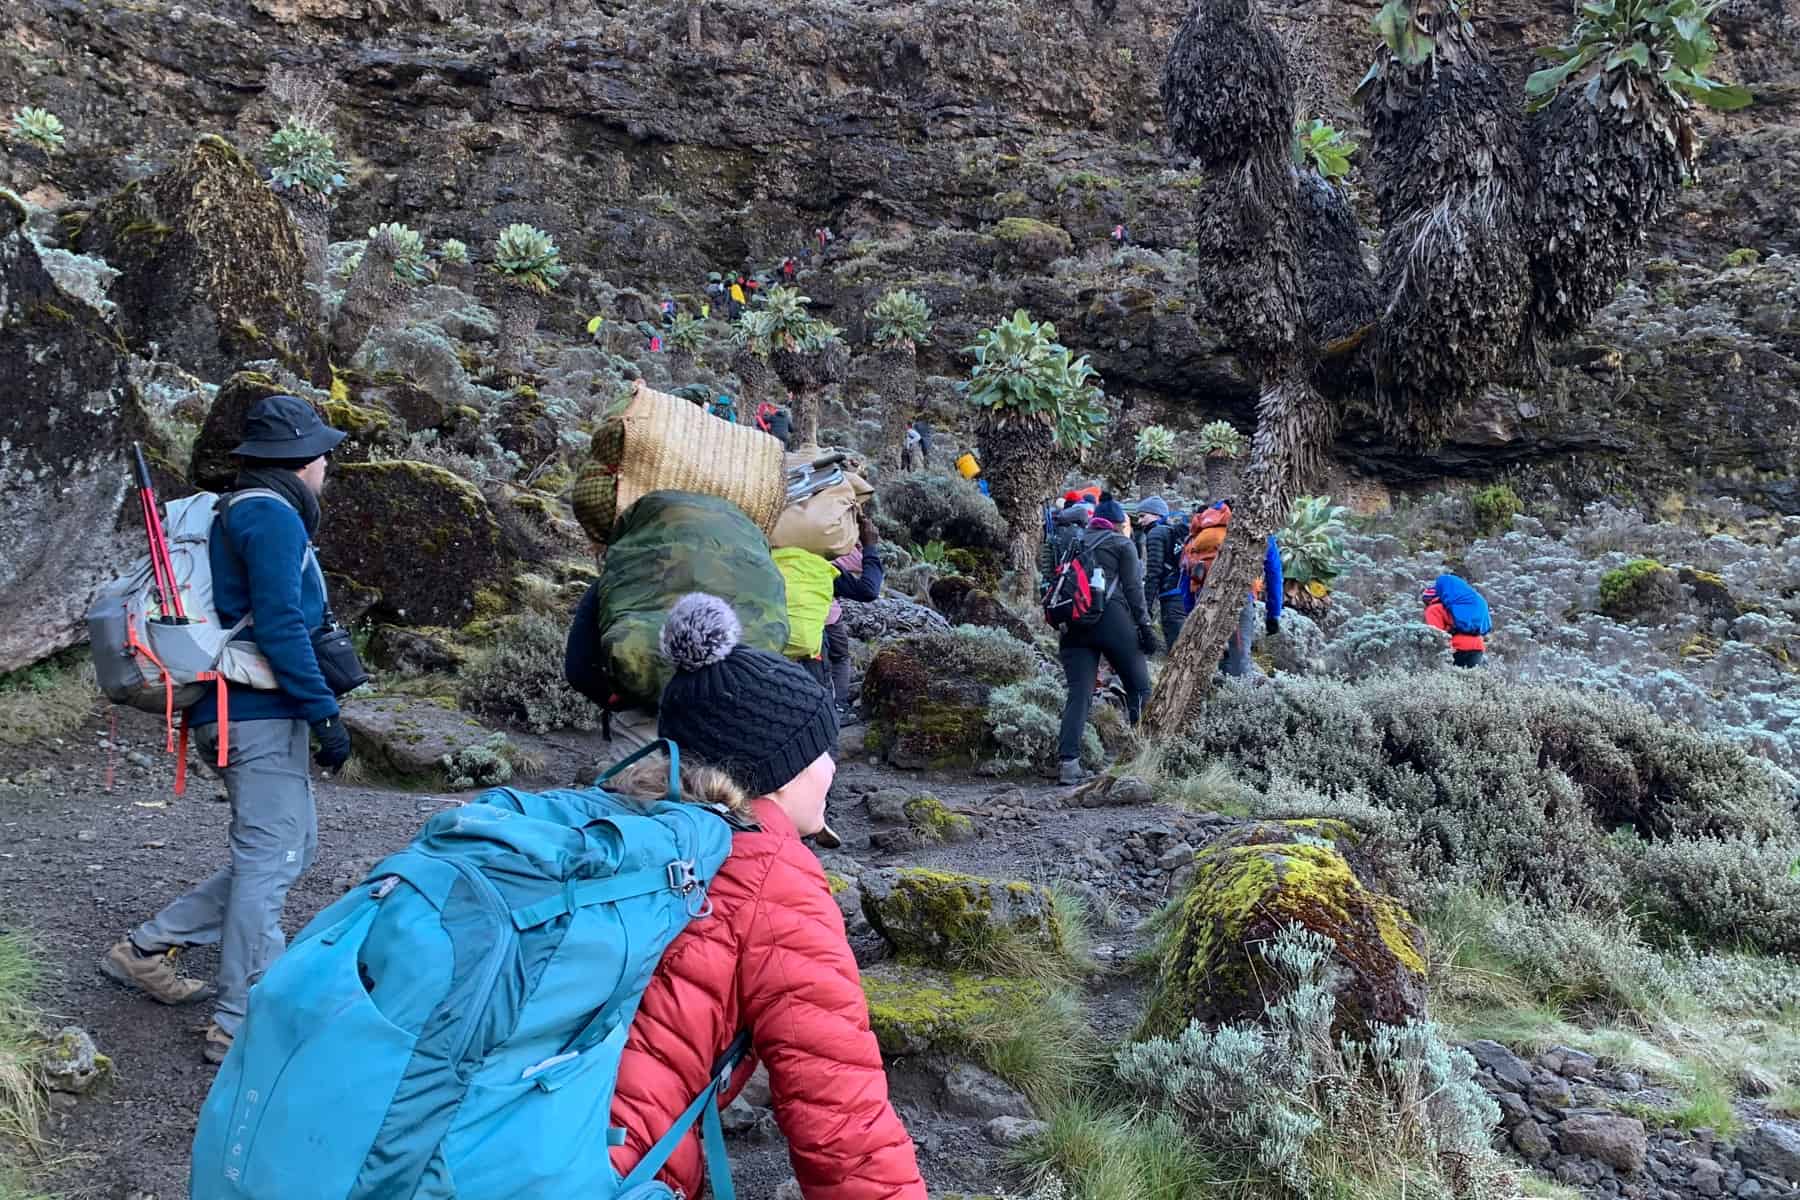 A woman in a red jacket and blue backpack clambers over low rocks and vivid green bushes towards a large rock wall where other people are walking